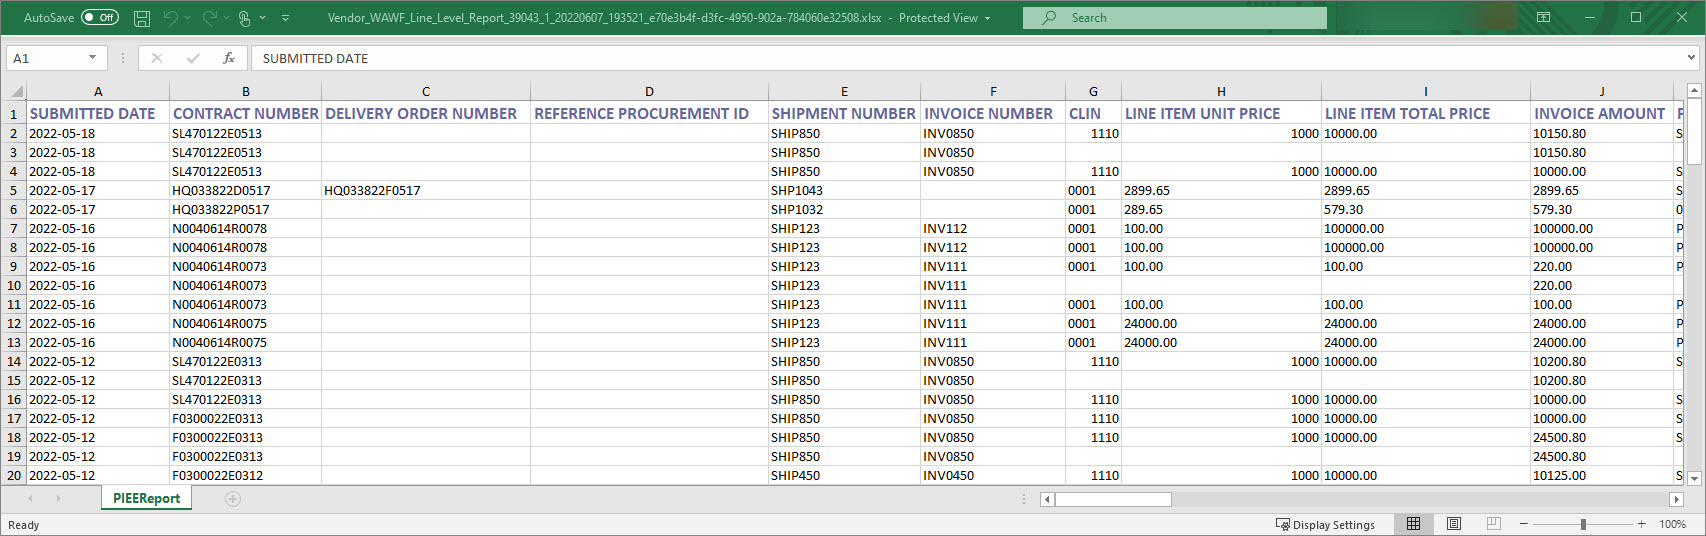 The image provides a preview of the Vendor Line Level Information Report Results Overview.